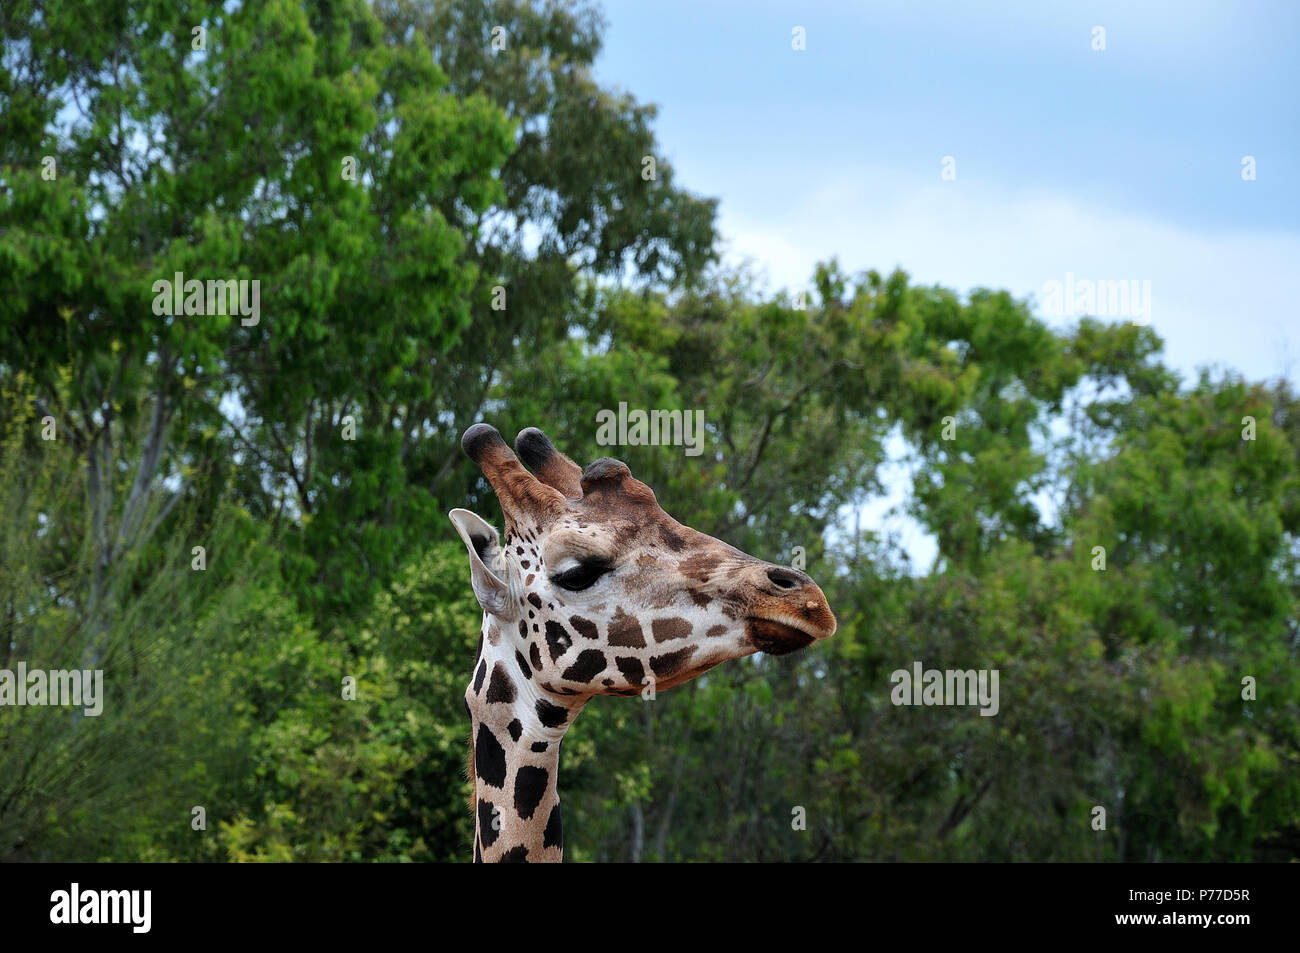 portrait of a giraffe with horn like ossicones in front of high grown trees Stock Photo